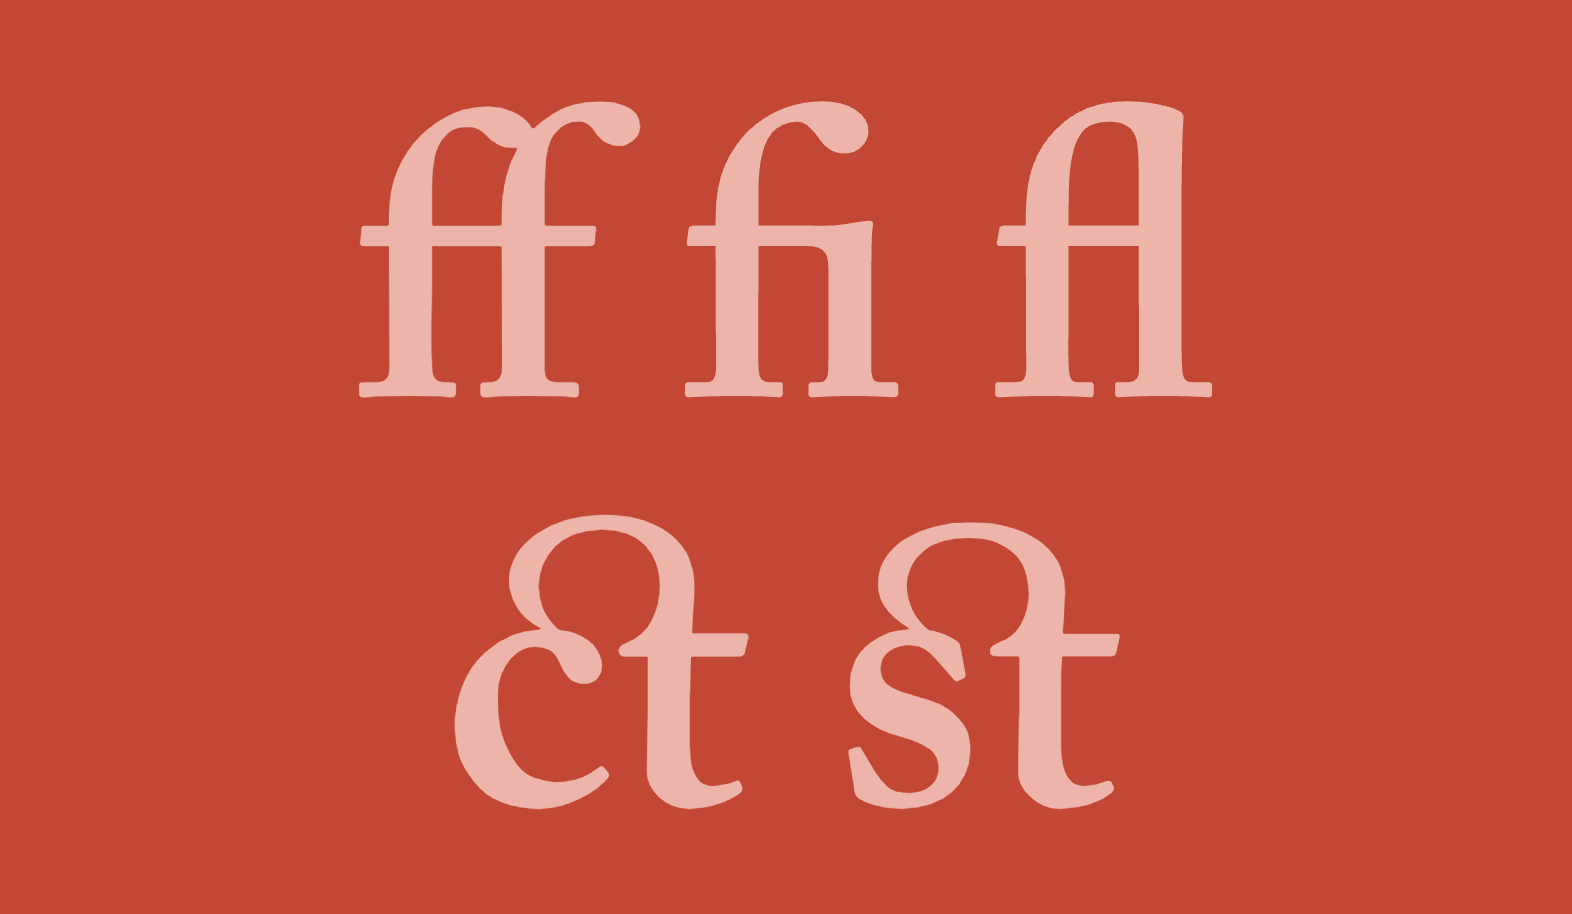 Ligatures in Caslon for ff, fi, fl, ct, and st